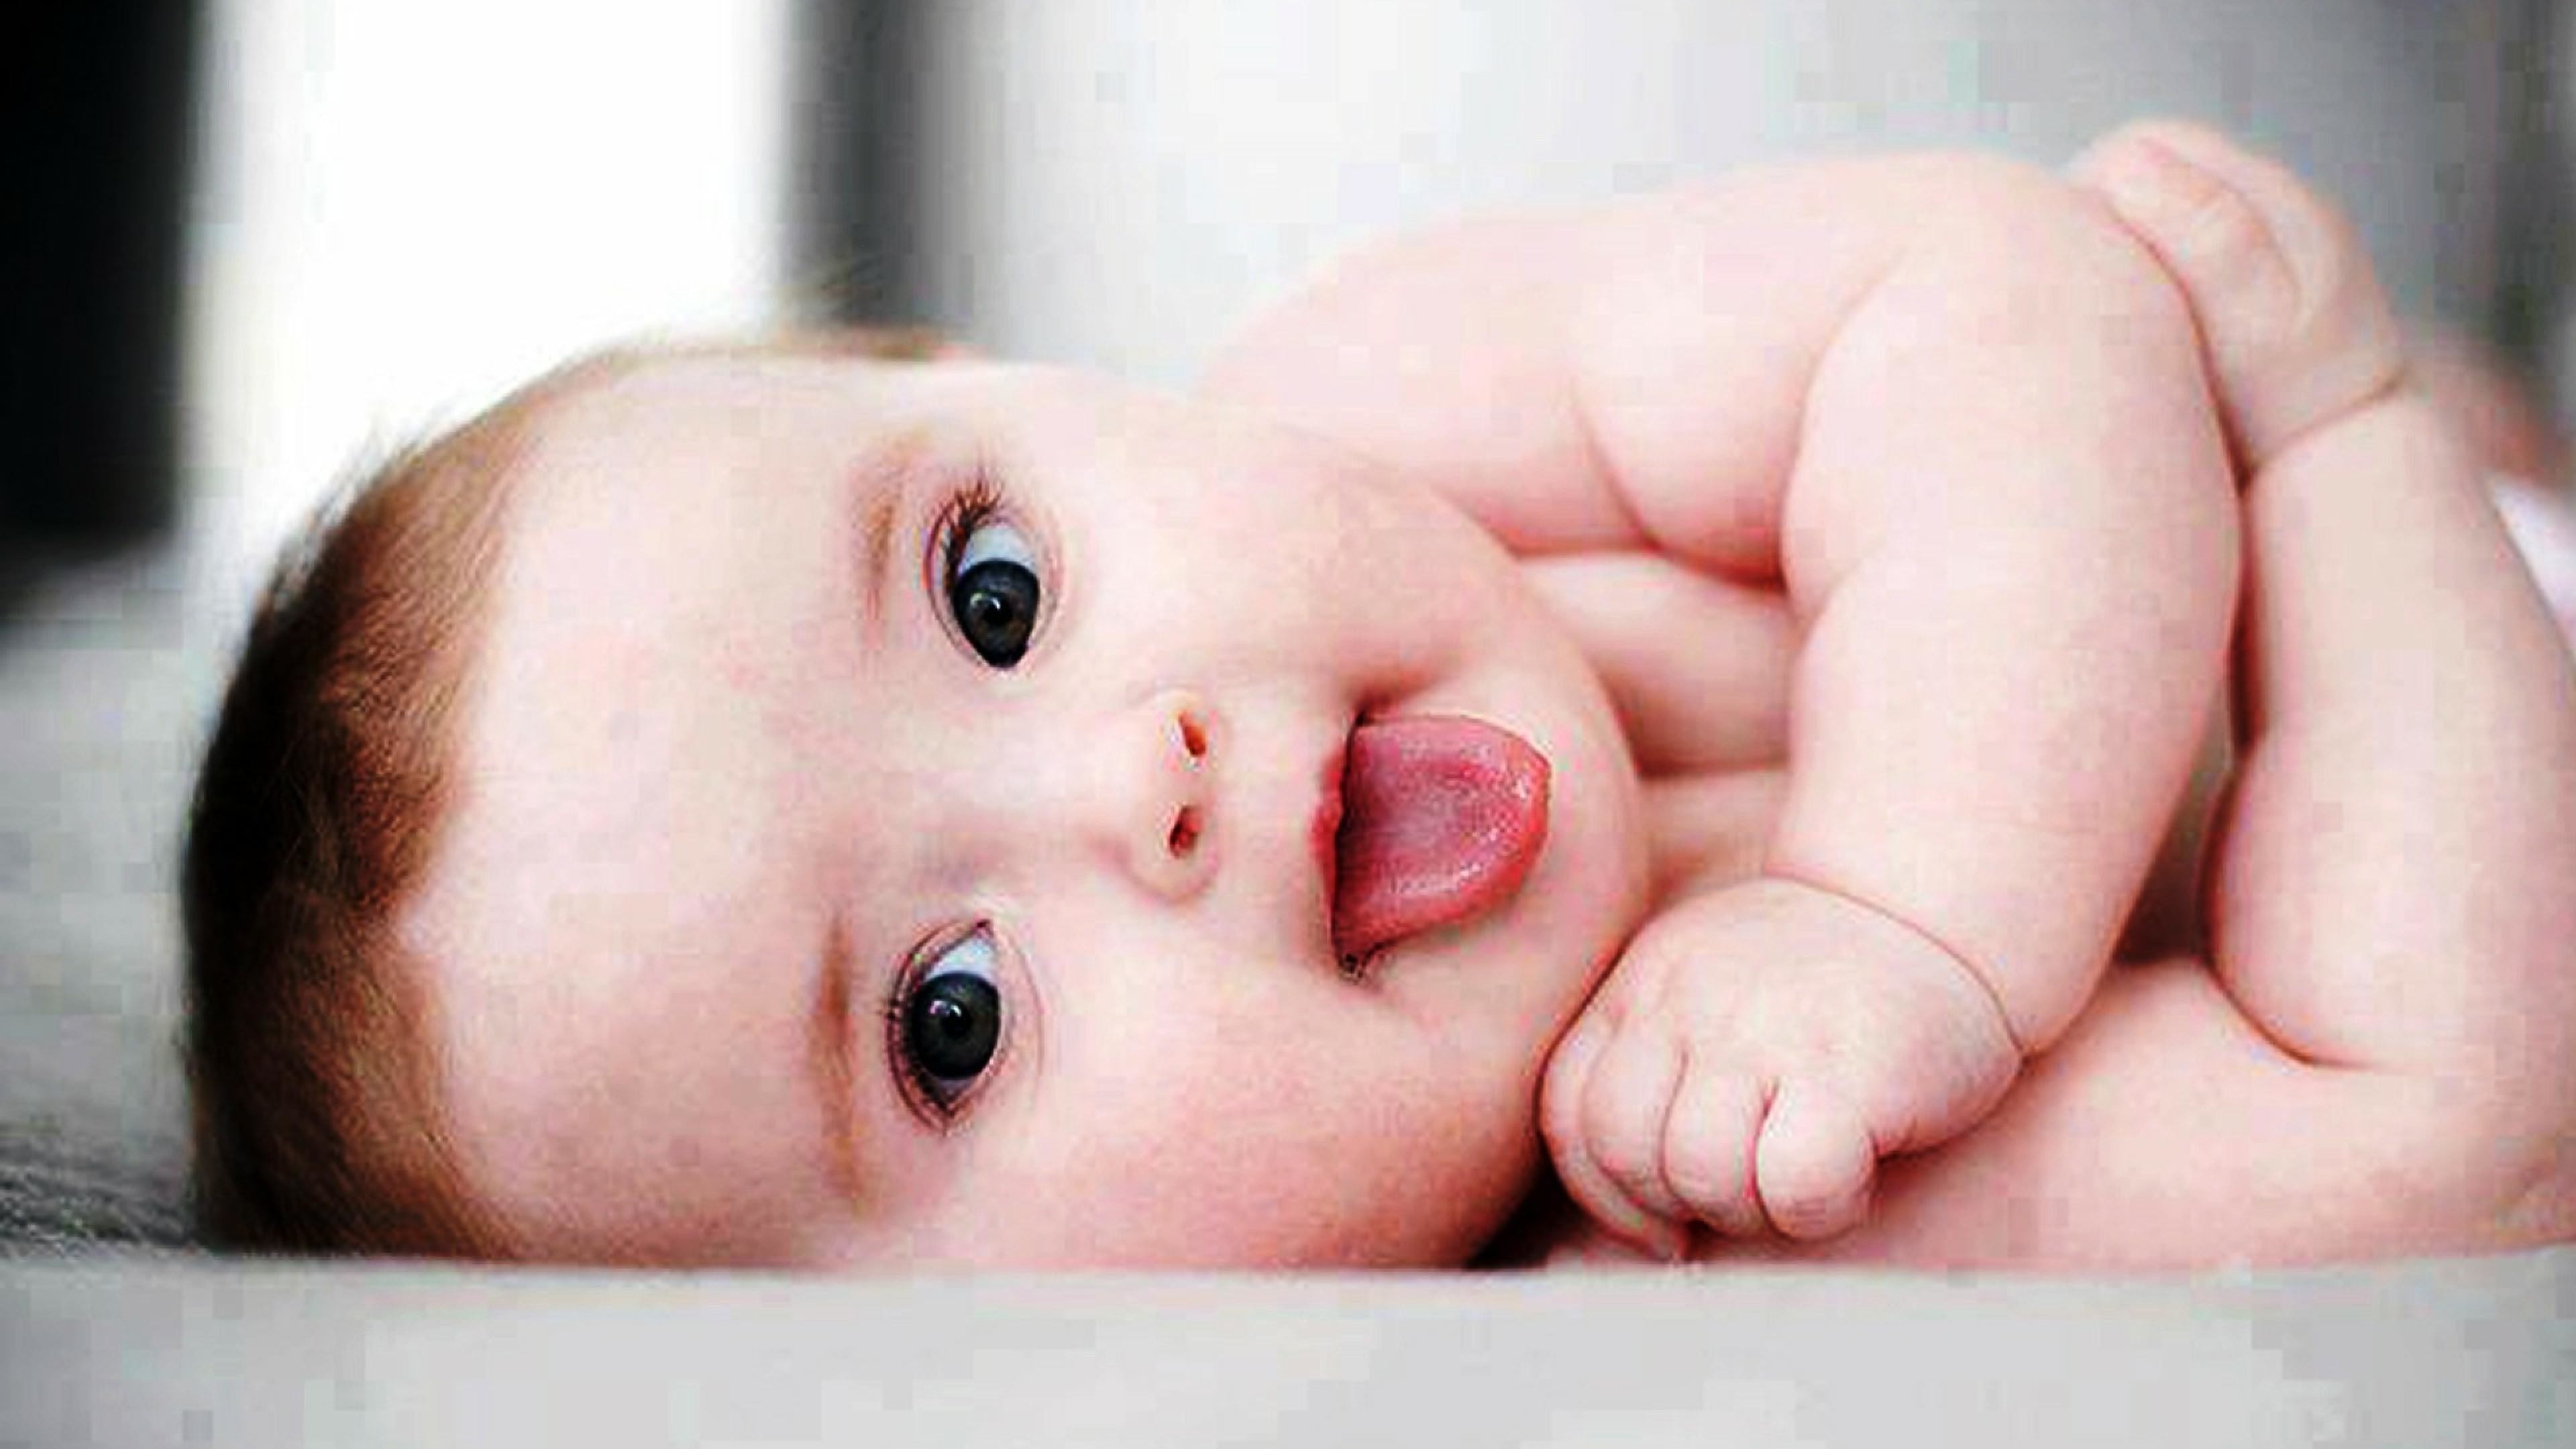 3840x2160 1600x900 A HD Wallpapers: Baby Photos Download Free|Images Of Cute Babies HD  .